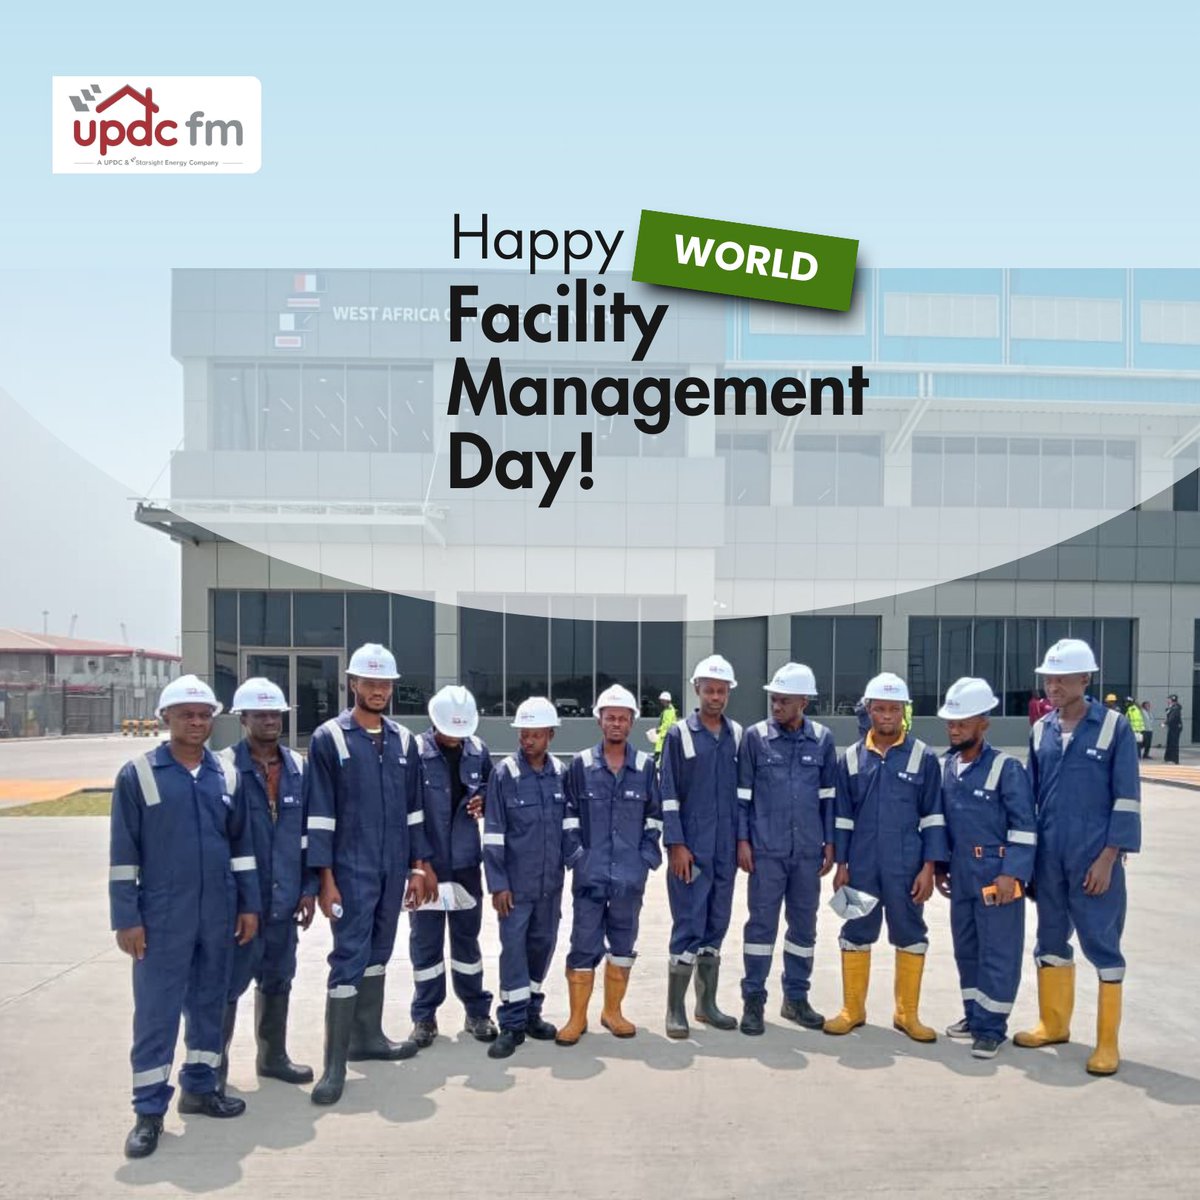 Happy World Facility Management Day! 

Today, we celebrate the global impact of facility managers and their multifaceted skill sets.

Join us in honoring the professionals who create efficient and sustainable spaces while enhancing experiences.

#WorldFMday #FacilityManagement